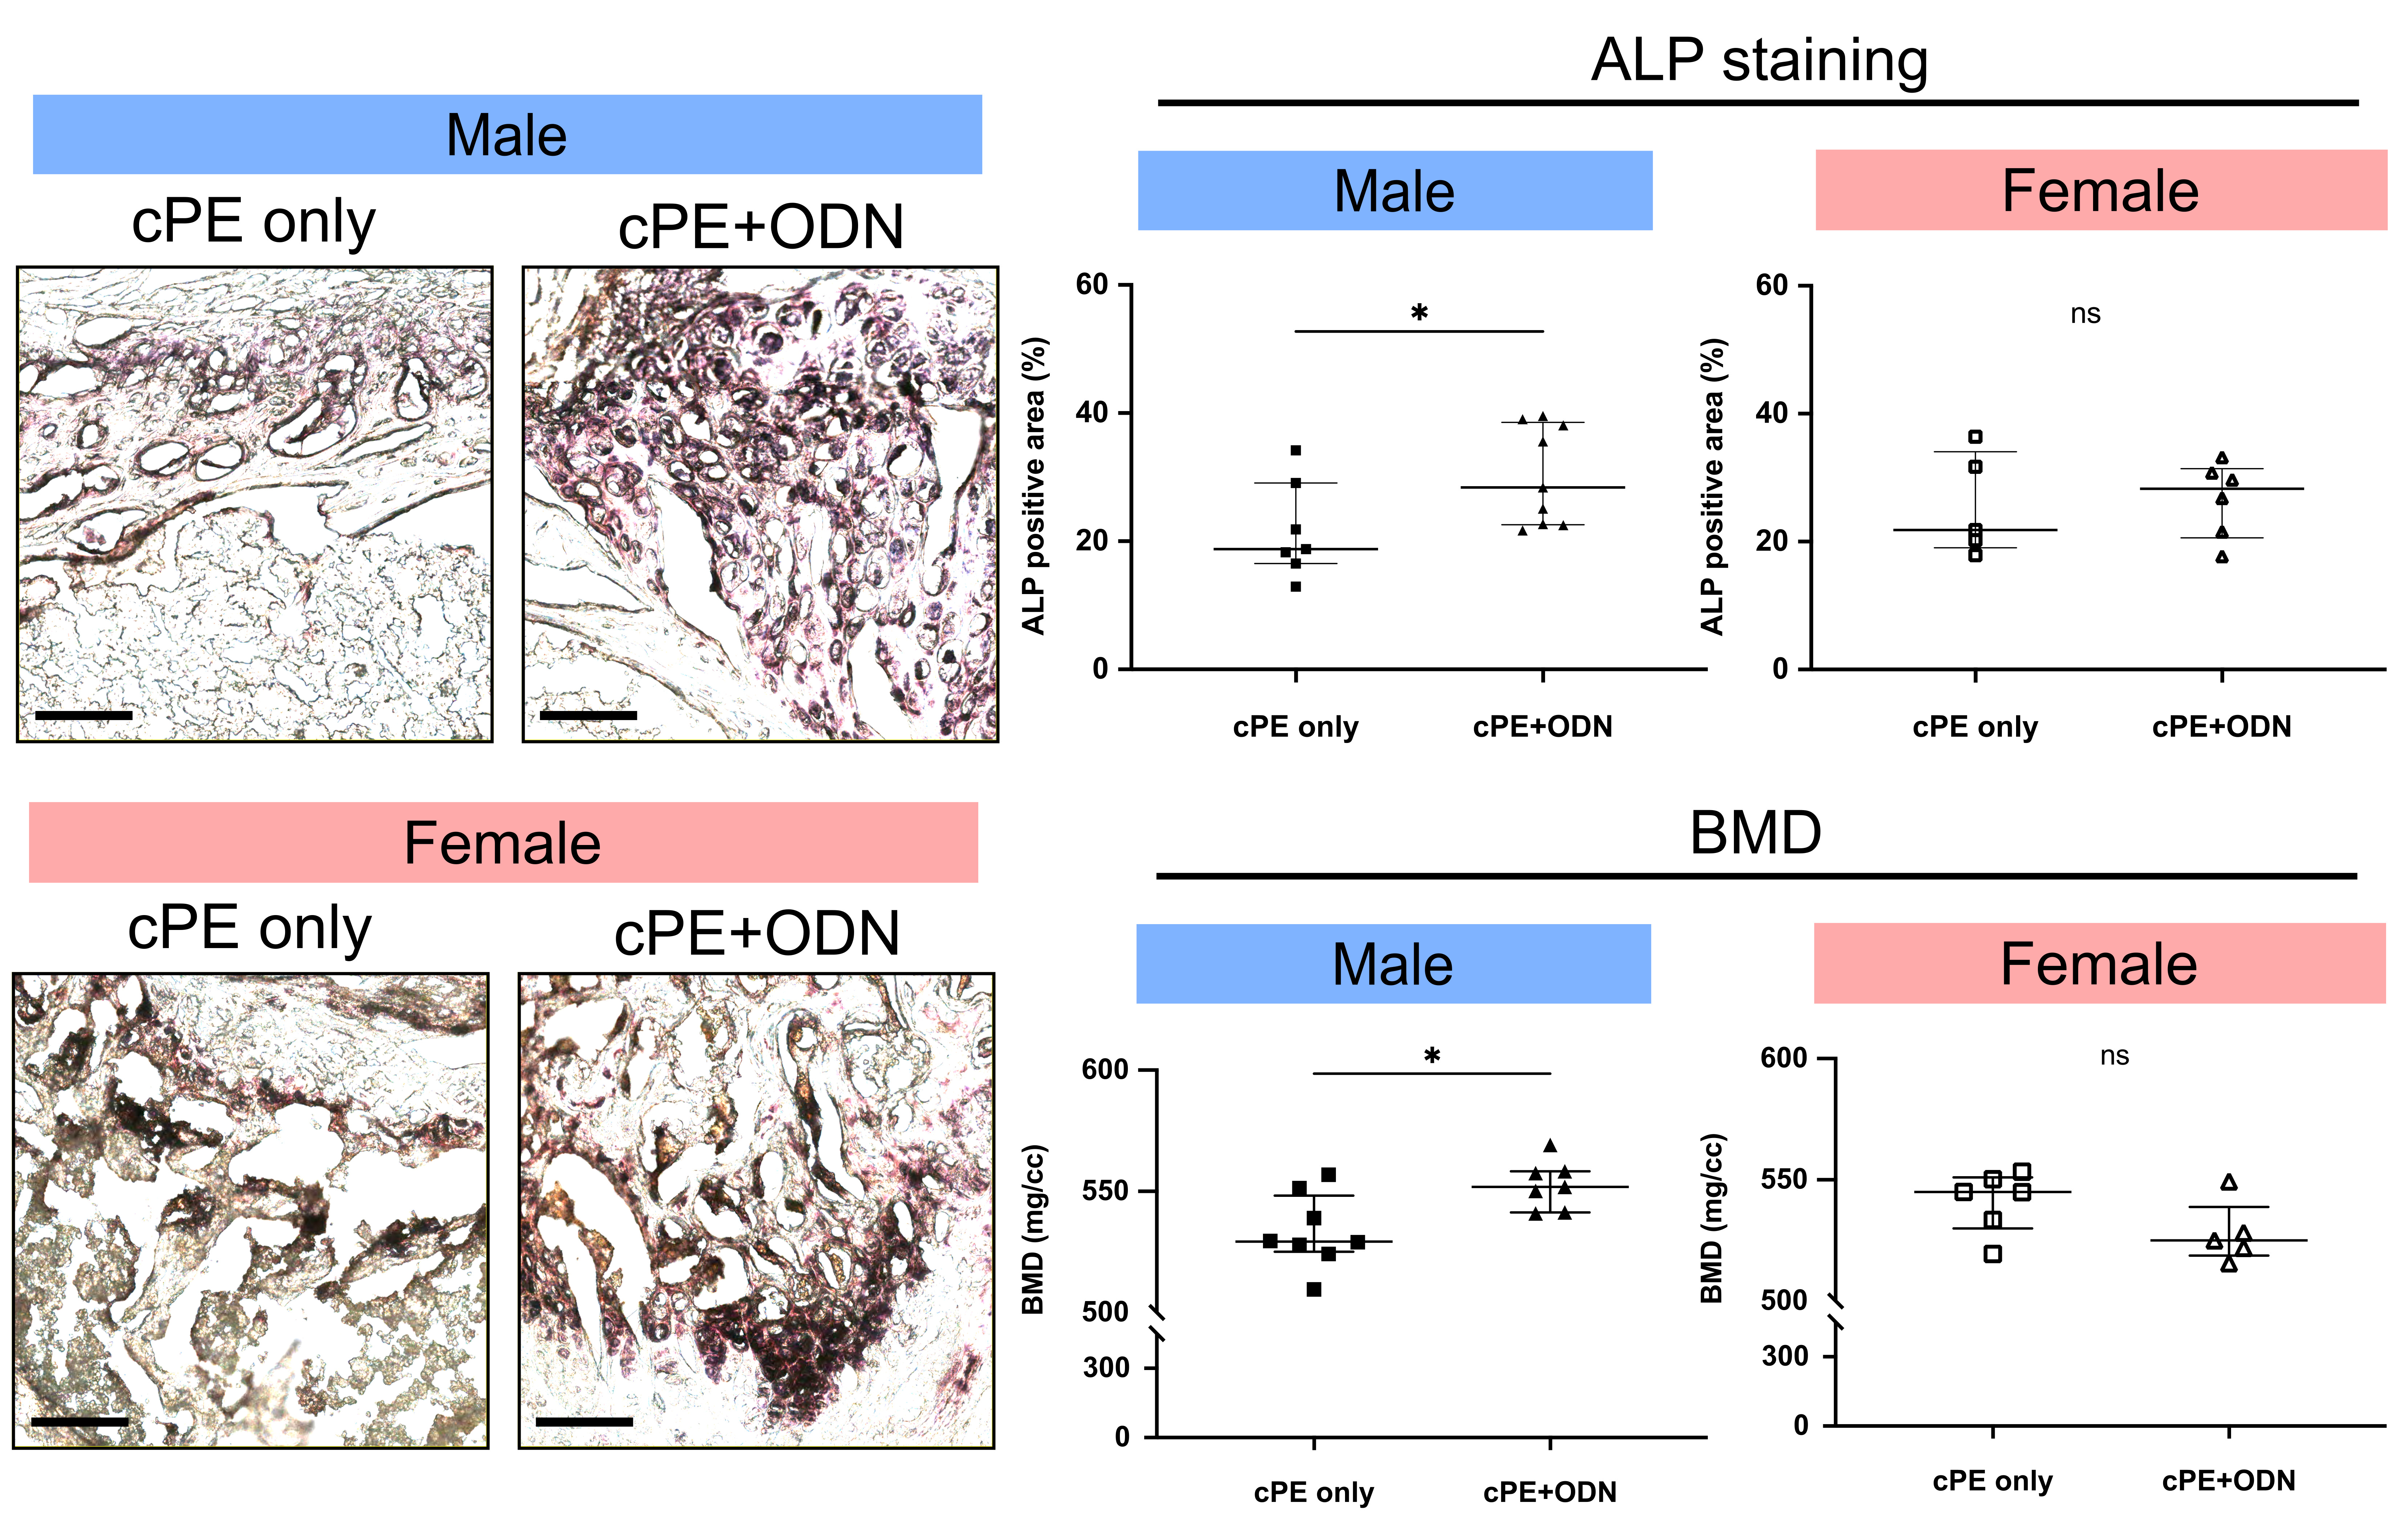 Fig. 4 
            Alkaline phosphatase (ALP) staining and micro-CT analysis in vivo. Representative images of ALP staining and quantitative analysis of ALP positive area proportion are shown (scale bar = 100 μm) for male (control group: n = 7, oligodeoxynucleotide (ODN) group: n = 9) and female mice (control group: n = 5, ODN group: n = 6). Quantitative assessments of bone mineral density (BMD) are also shown for male (control group: n = 8, ODN group: n = 7) and female mice (control group: n = 6, ODN group: n = 5). *p < 0.05, Mann-Whitney U test. cPE, contaminated polyethylene particles; ns, non-significant.
          